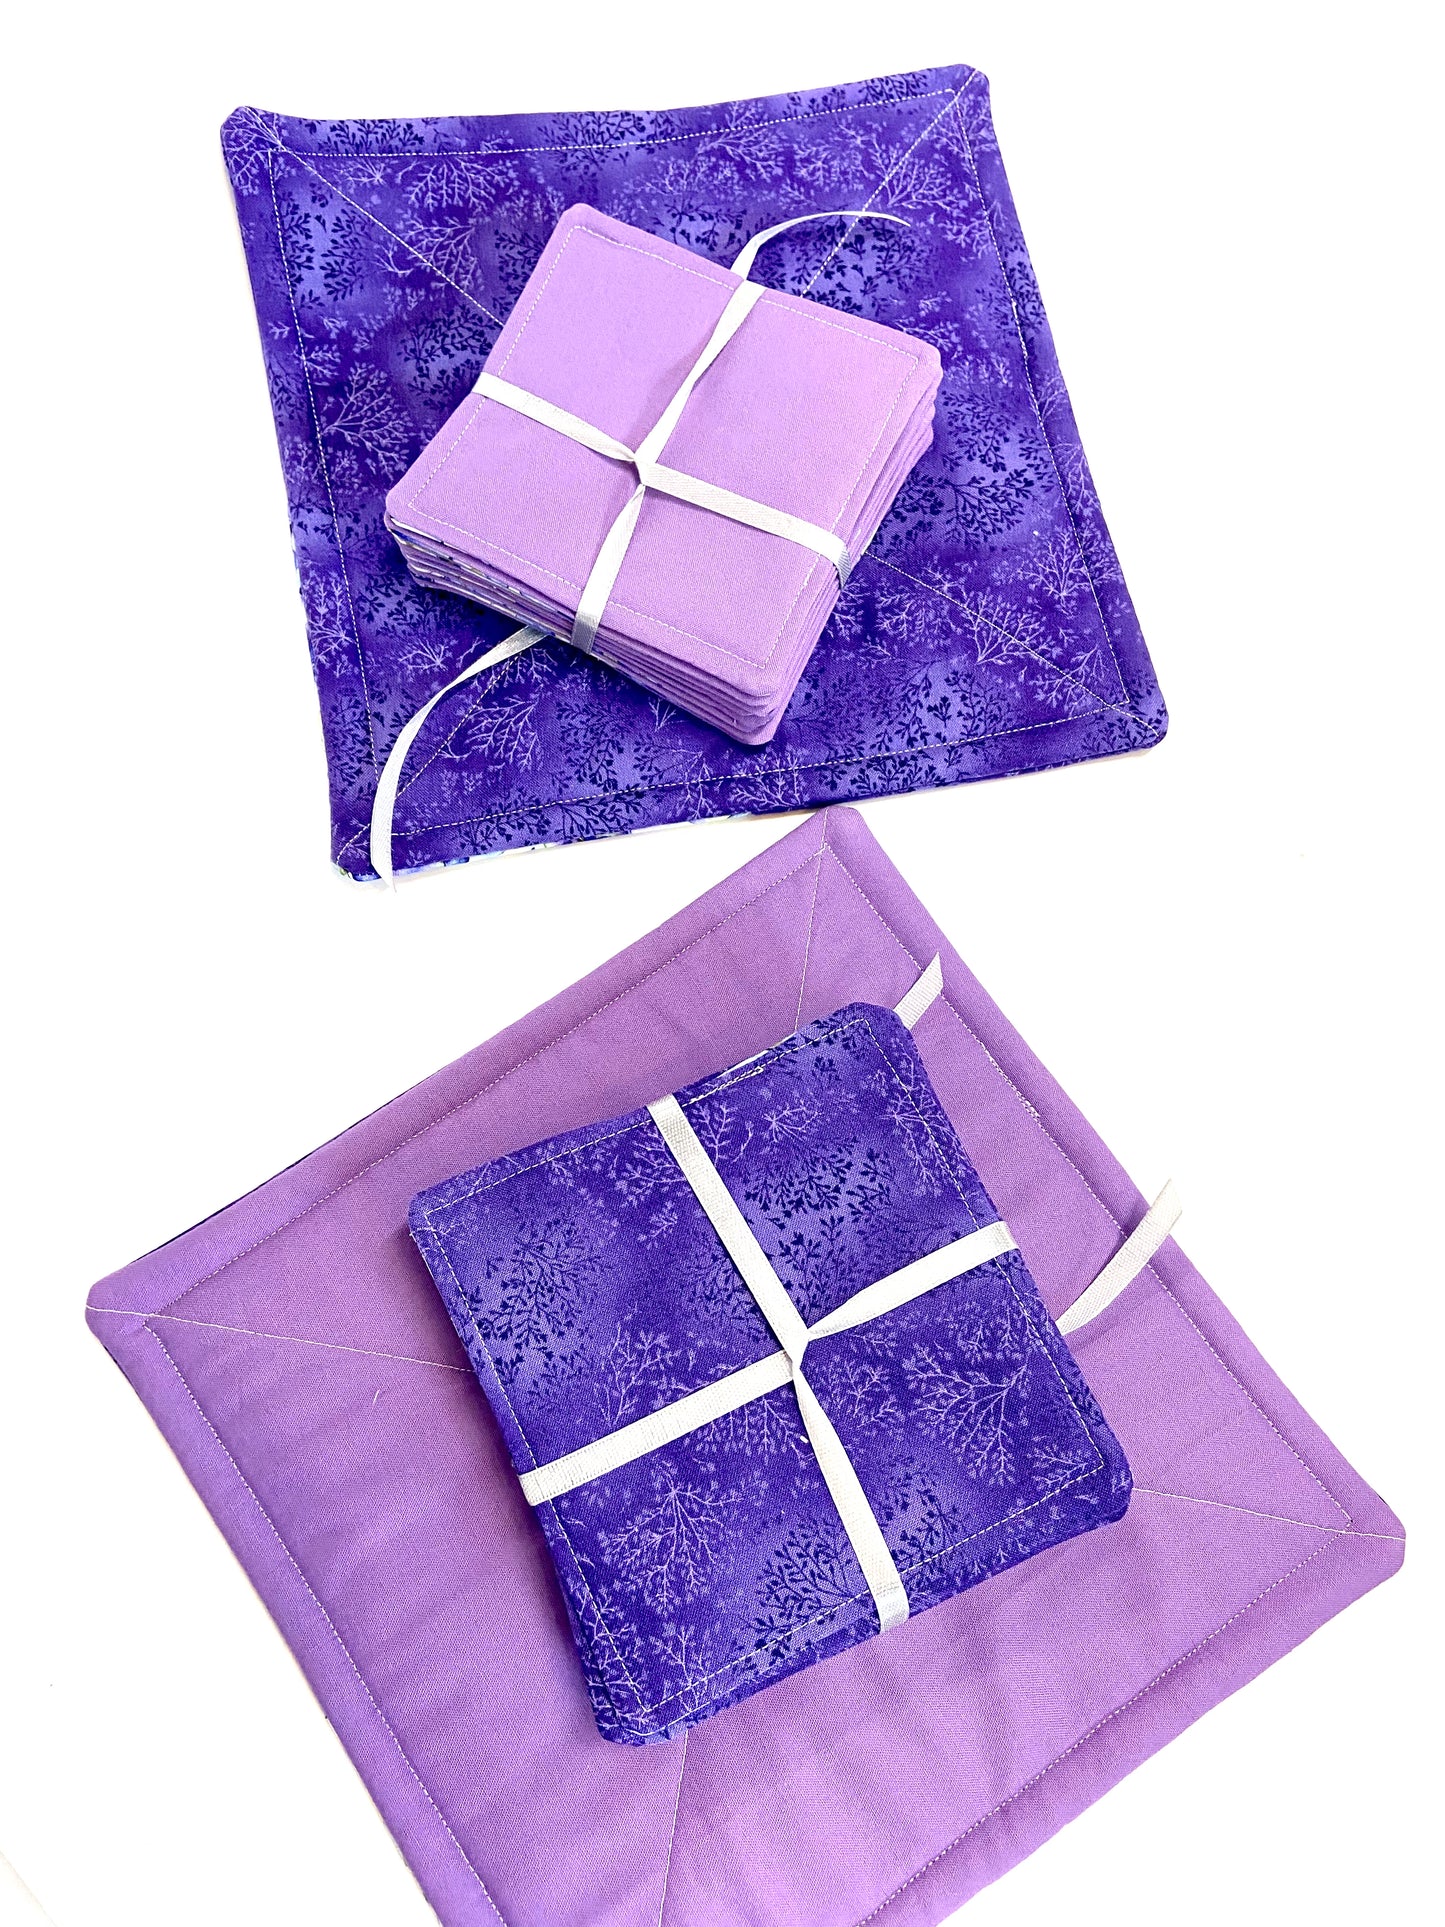 Tabletop Protector Hot Pad and Coasters Set - Purples and Pinks - Silverthorn’s Unique Handmade Decor